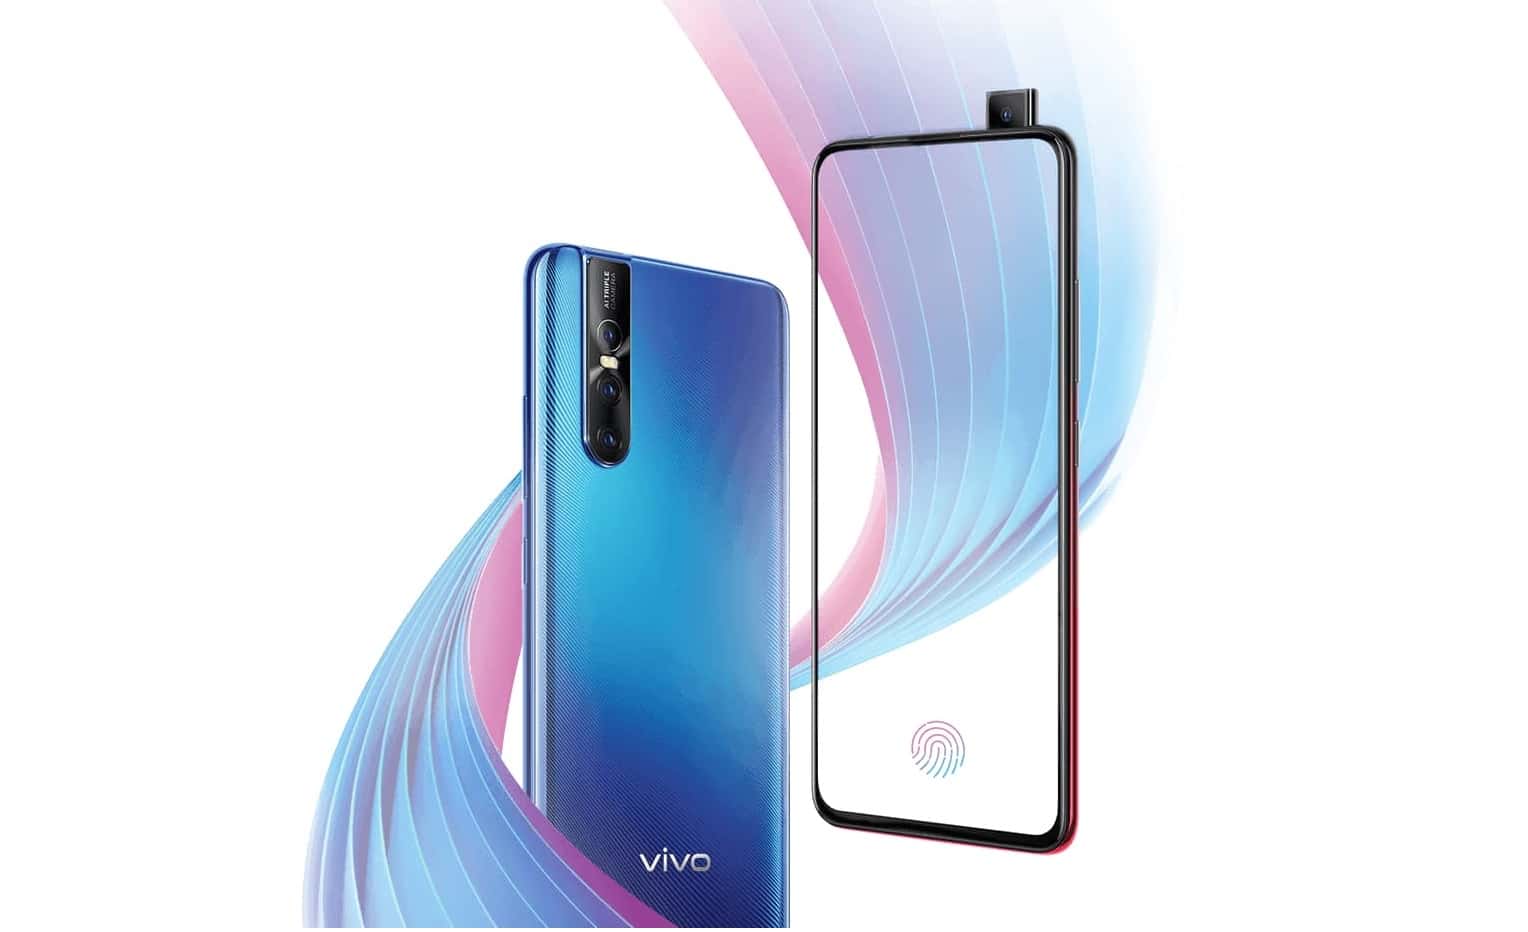 Vivo V15 Pro Full Specifications and All Details